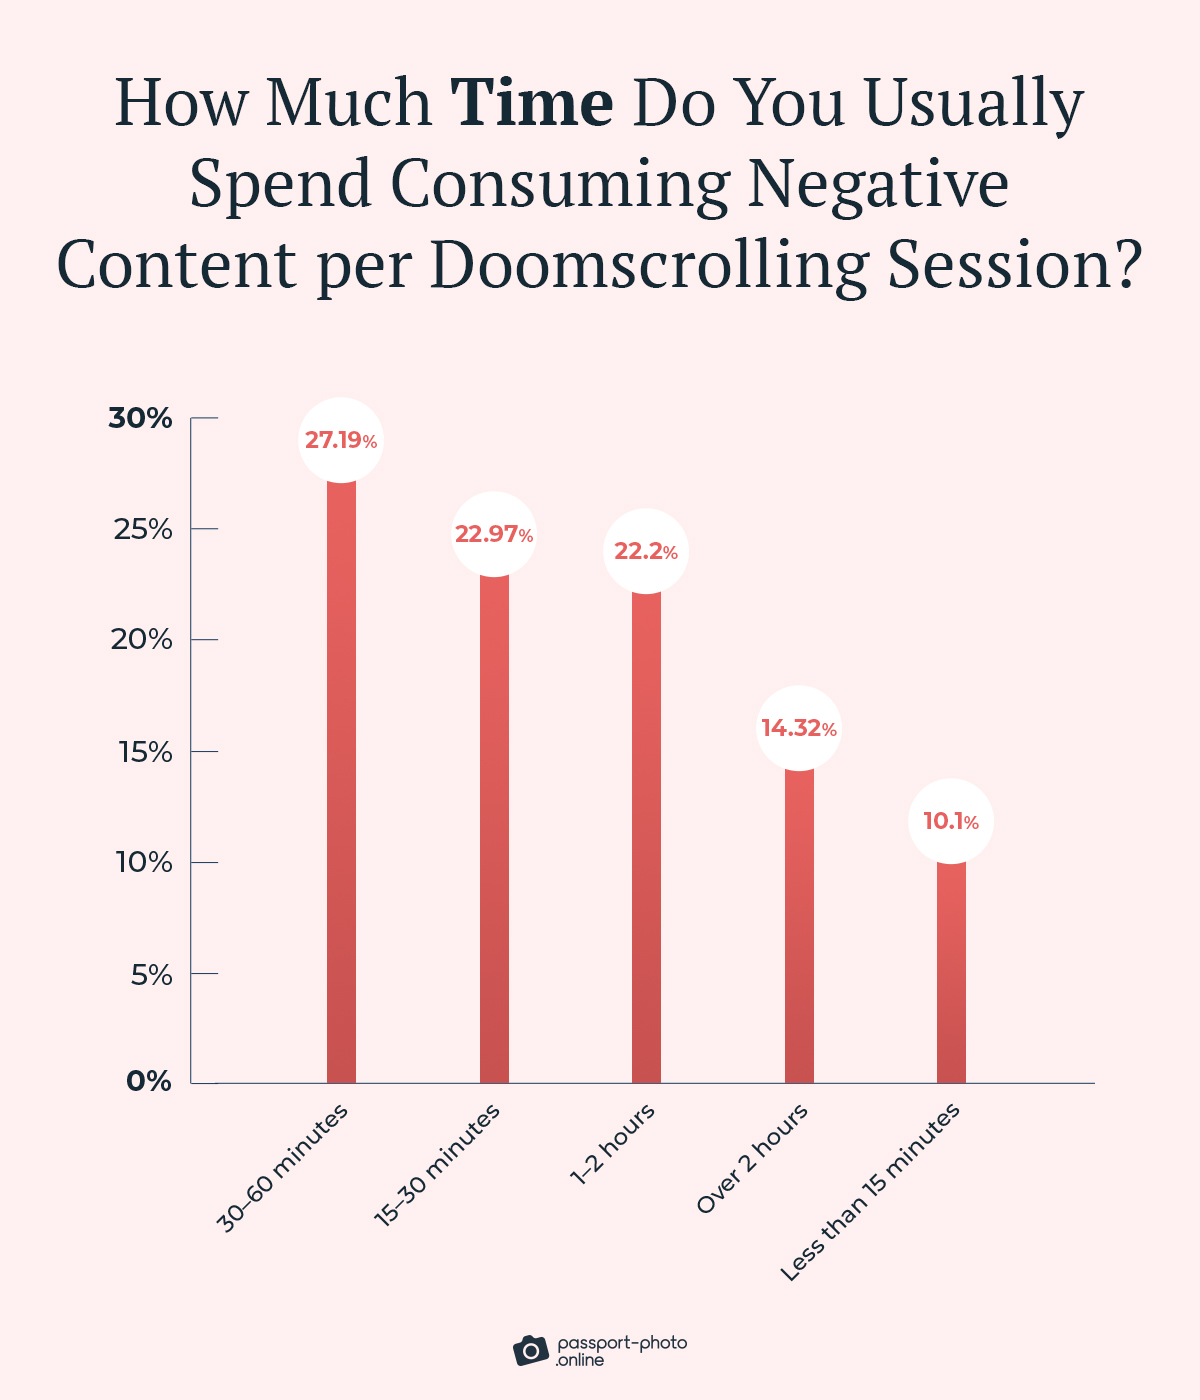 between 30 and 60 minutes is how long a doomscrolling session typically lasts: 27%